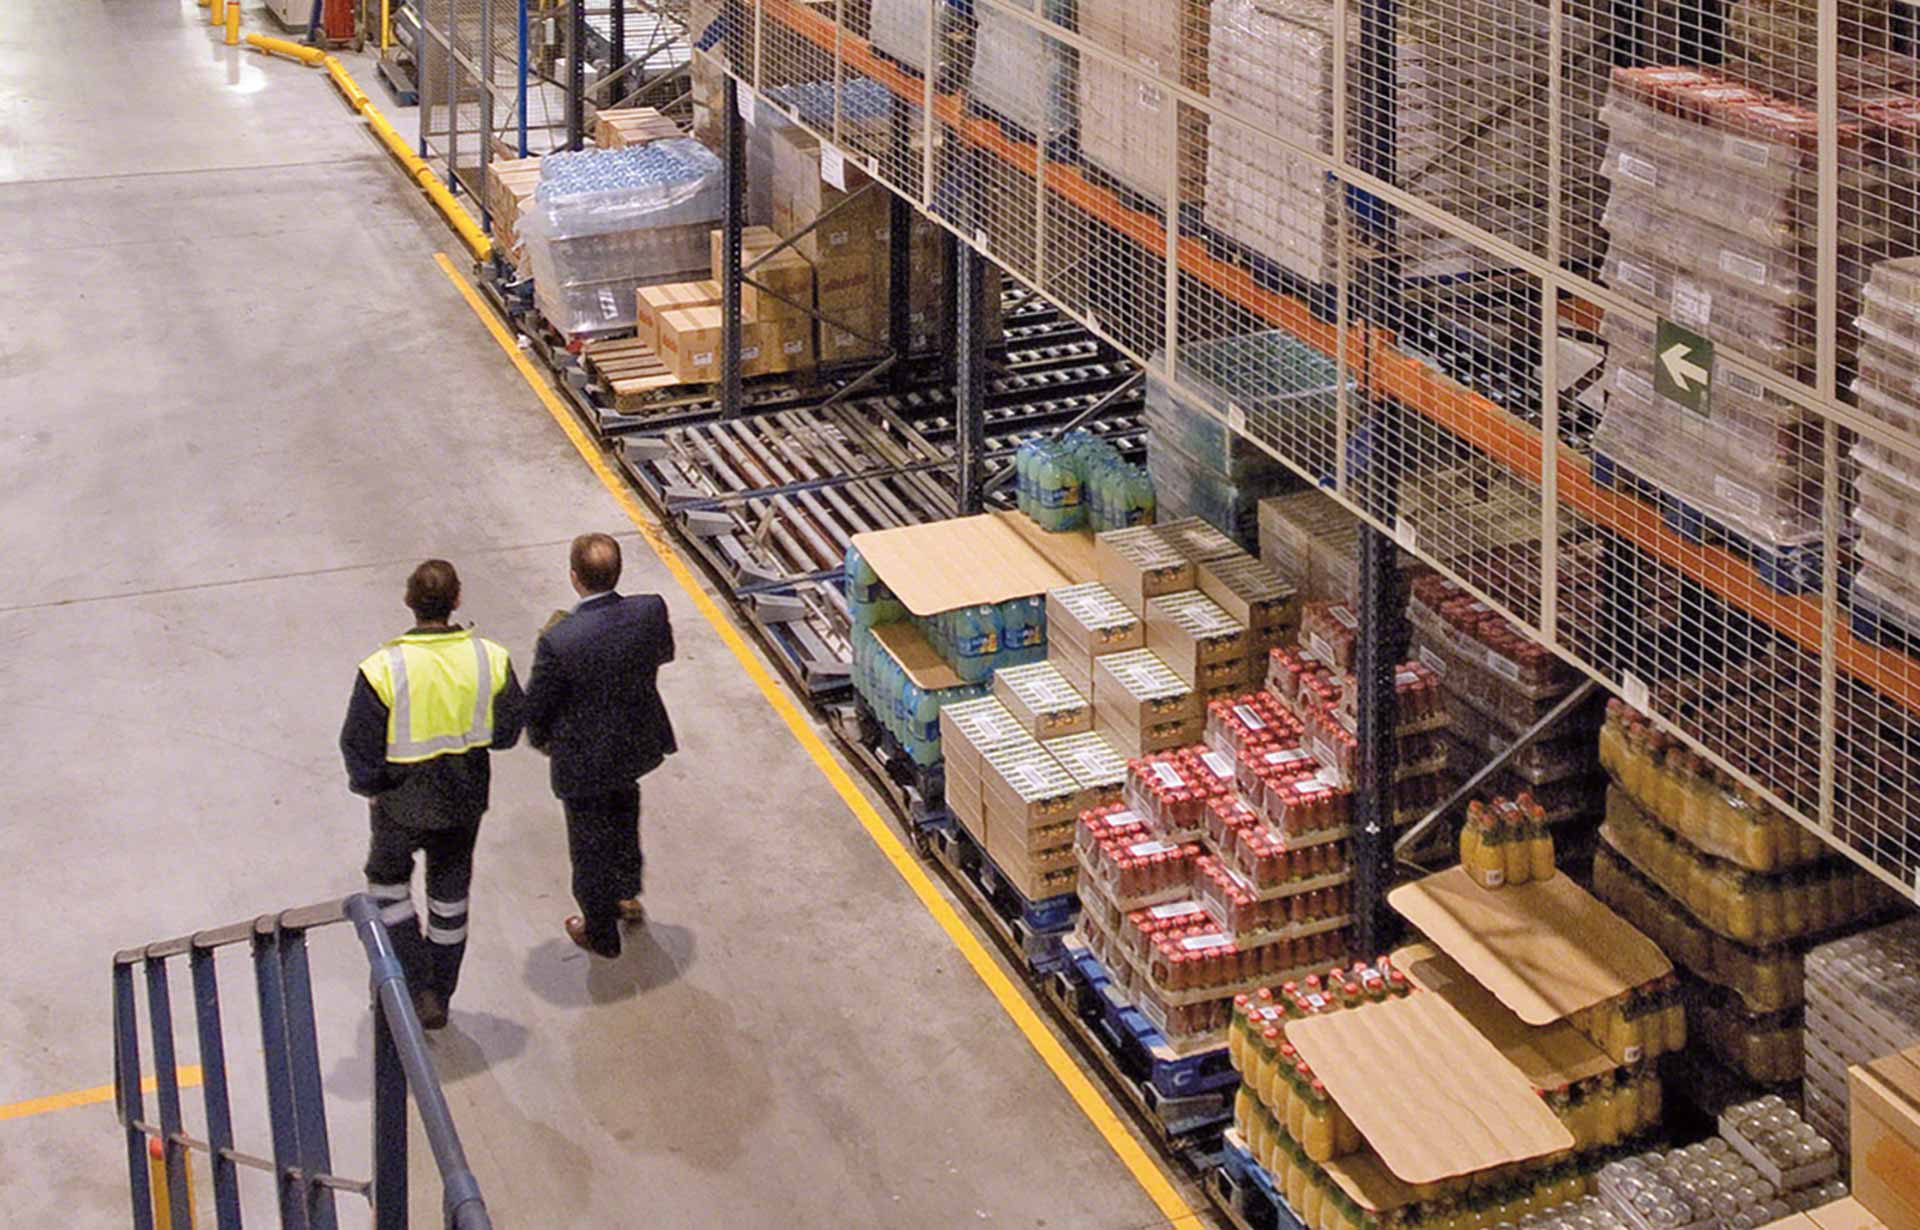 Warehouse stakeholders strive to find the best warehouse management system